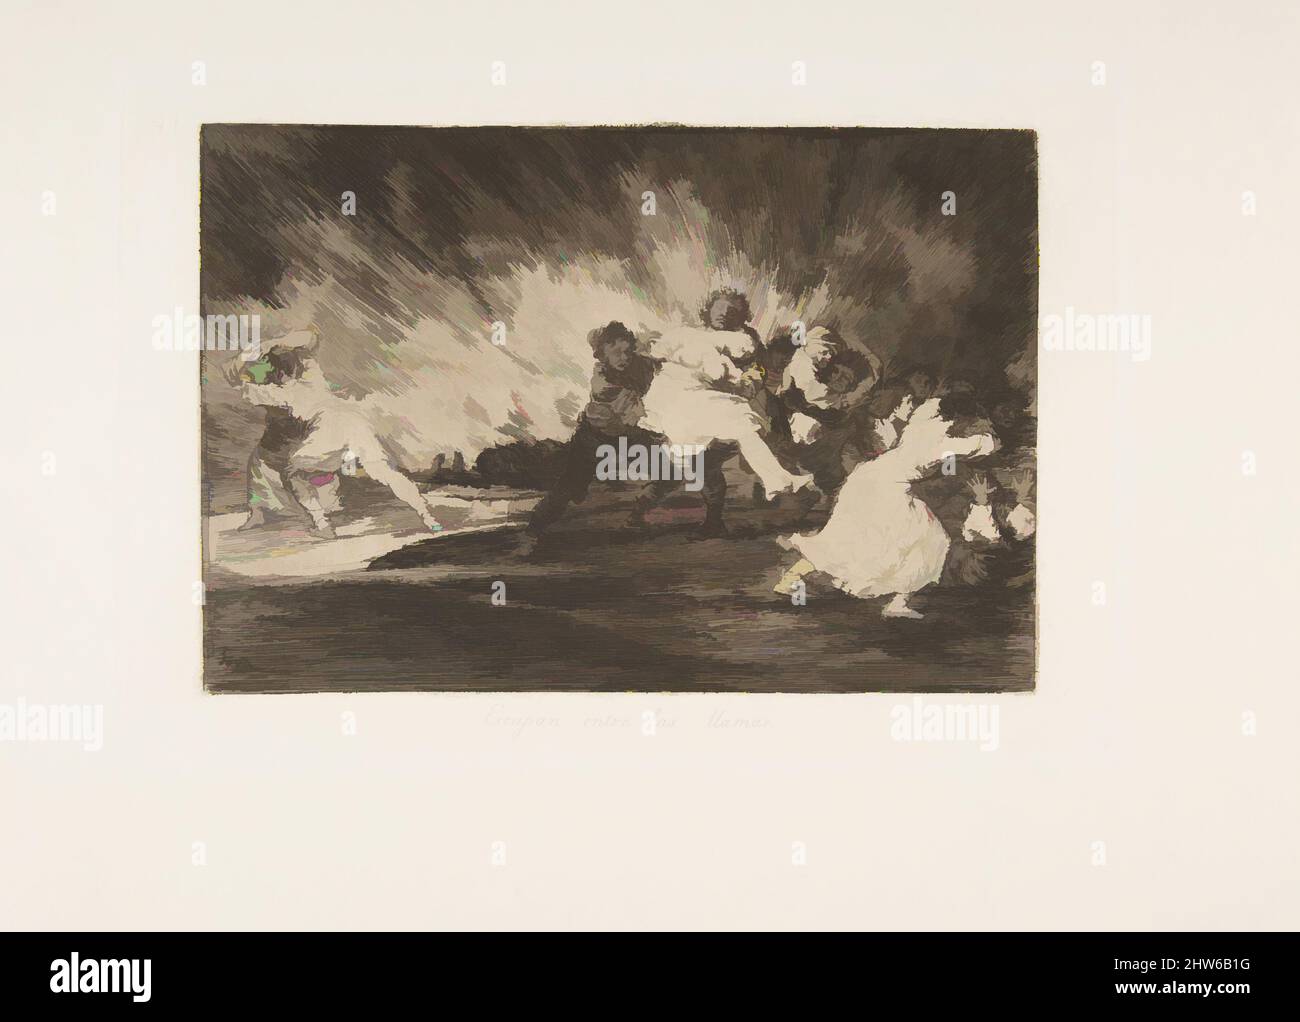 Art inspired by Plate 41 from 'The Disasters of War' (Los Desastres de La Guerra): 'They escape through the flames.' (Escapan entre las llamas), 1810 (published 1863), Etching and burin, Plate: 6 5/16 × 9 1/4 in. (16 × 23.5 cm), Prints, Goya (Francisco de Goya y Lucientes) (Spanish, Classic works modernized by Artotop with a splash of modernity. Shapes, color and value, eye-catching visual impact on art. Emotions through freedom of artworks in a contemporary way. A timeless message pursuing a wildly creative new direction. Artists turning to the digital medium and creating the Artotop NFT Stock Photo